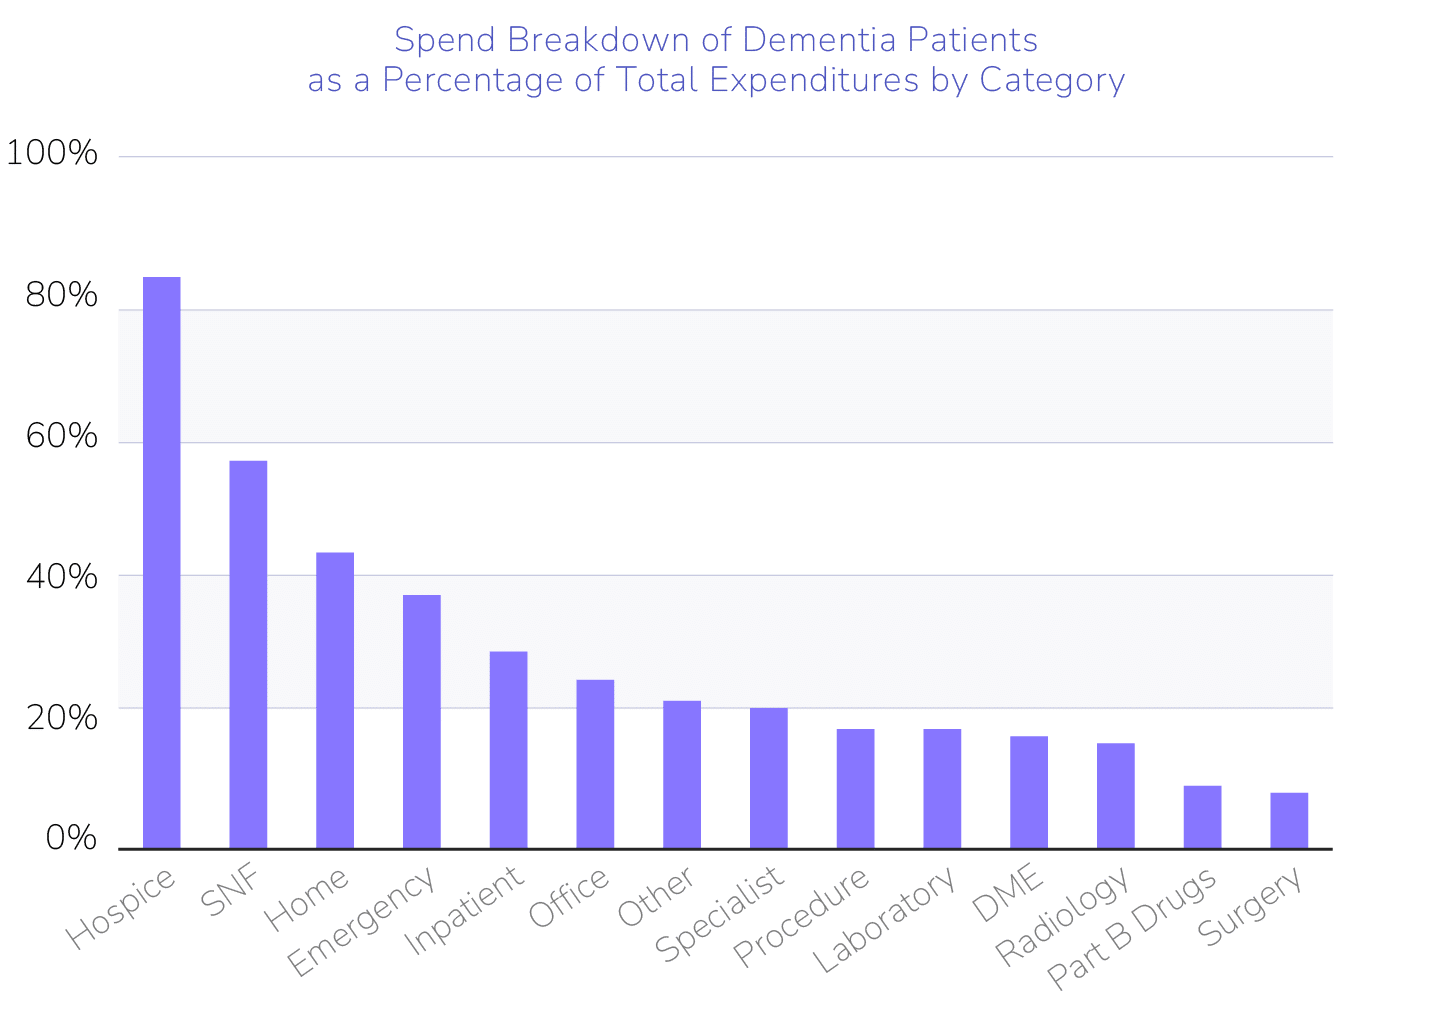 Spend Breakdown of Dementia Patients as a Percentage of Total Expenditures by Category